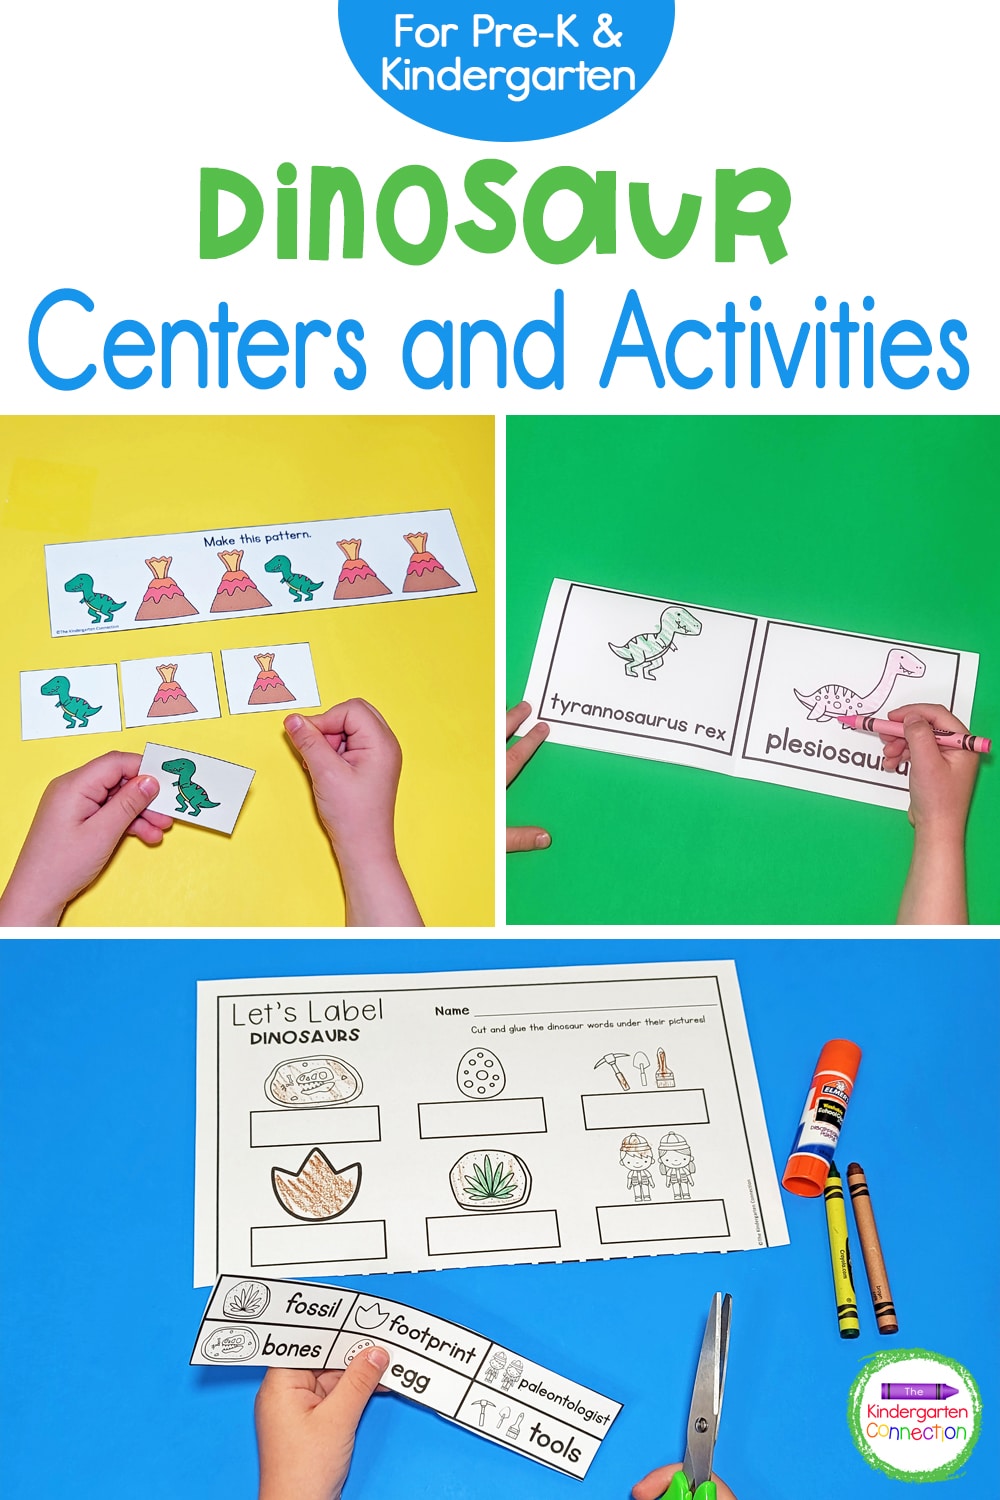 This pack of Dinosaur Centers and Activities for Pre-K & Kindergarten is filled with tons of dino-themed learning fun!